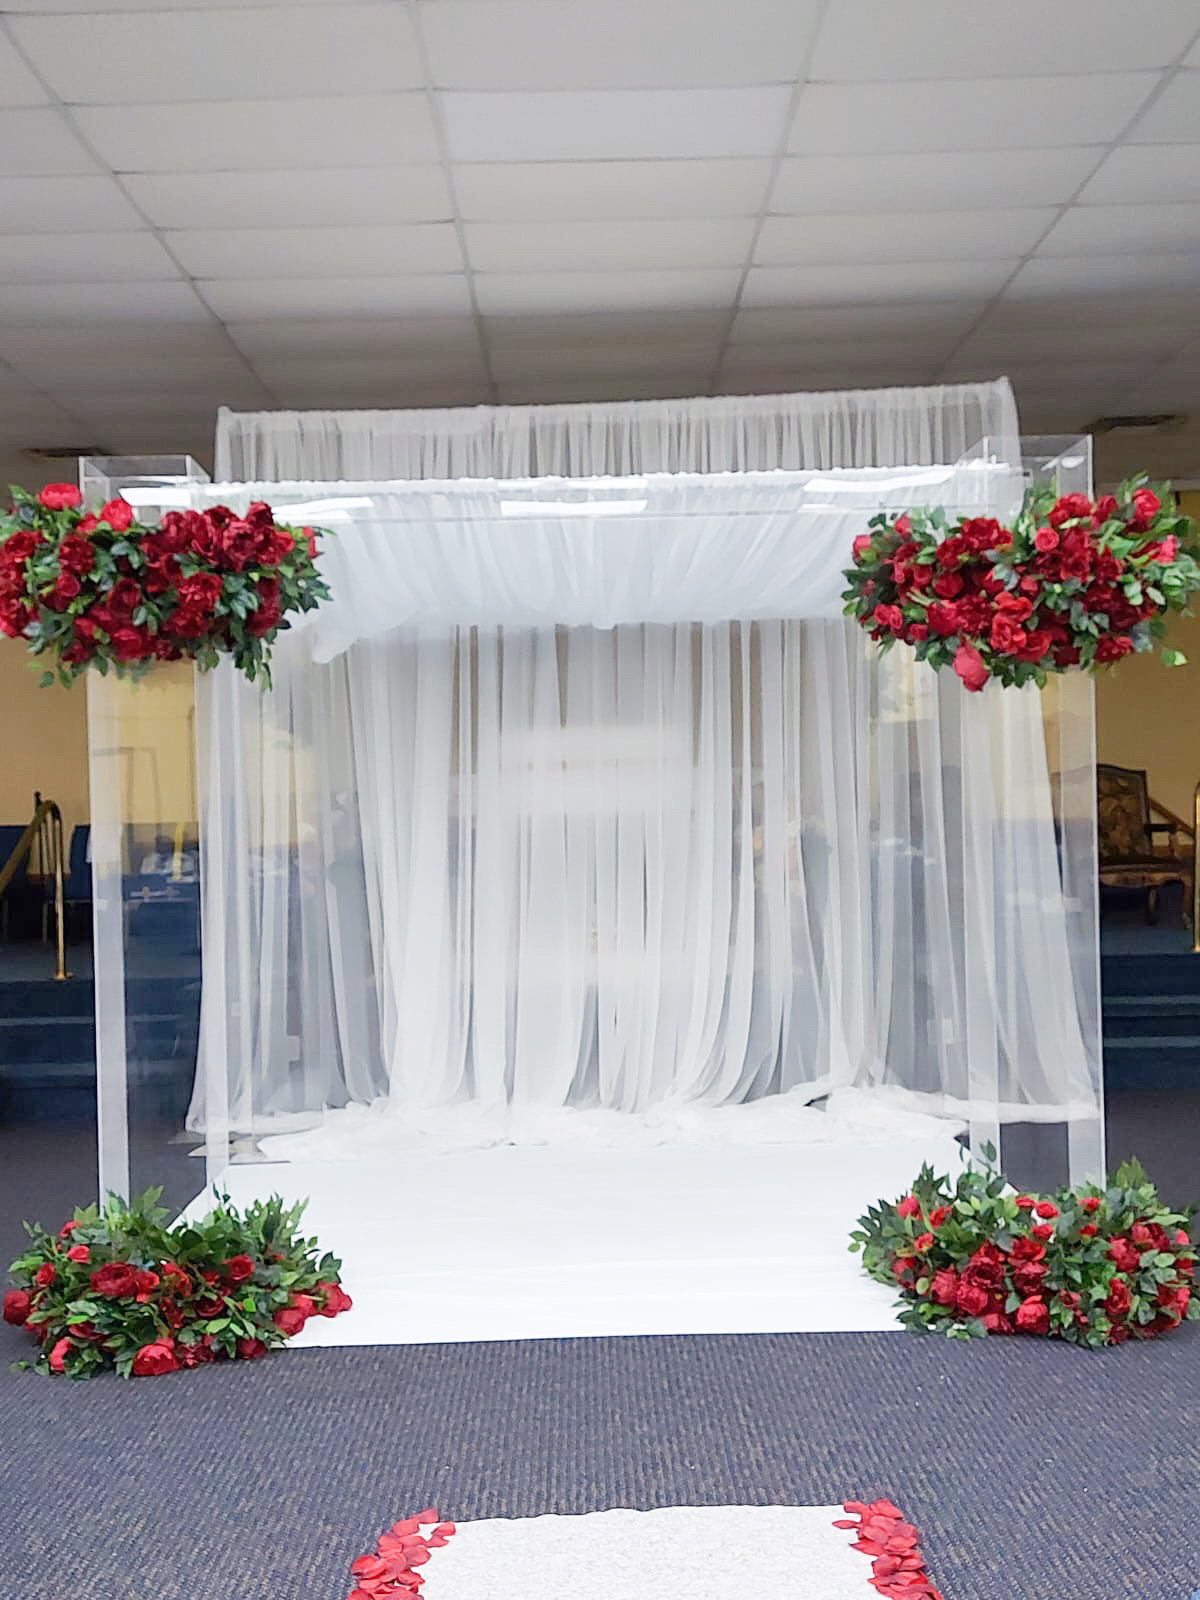 acrylic_chuppah_with_red_florals_3.JPG